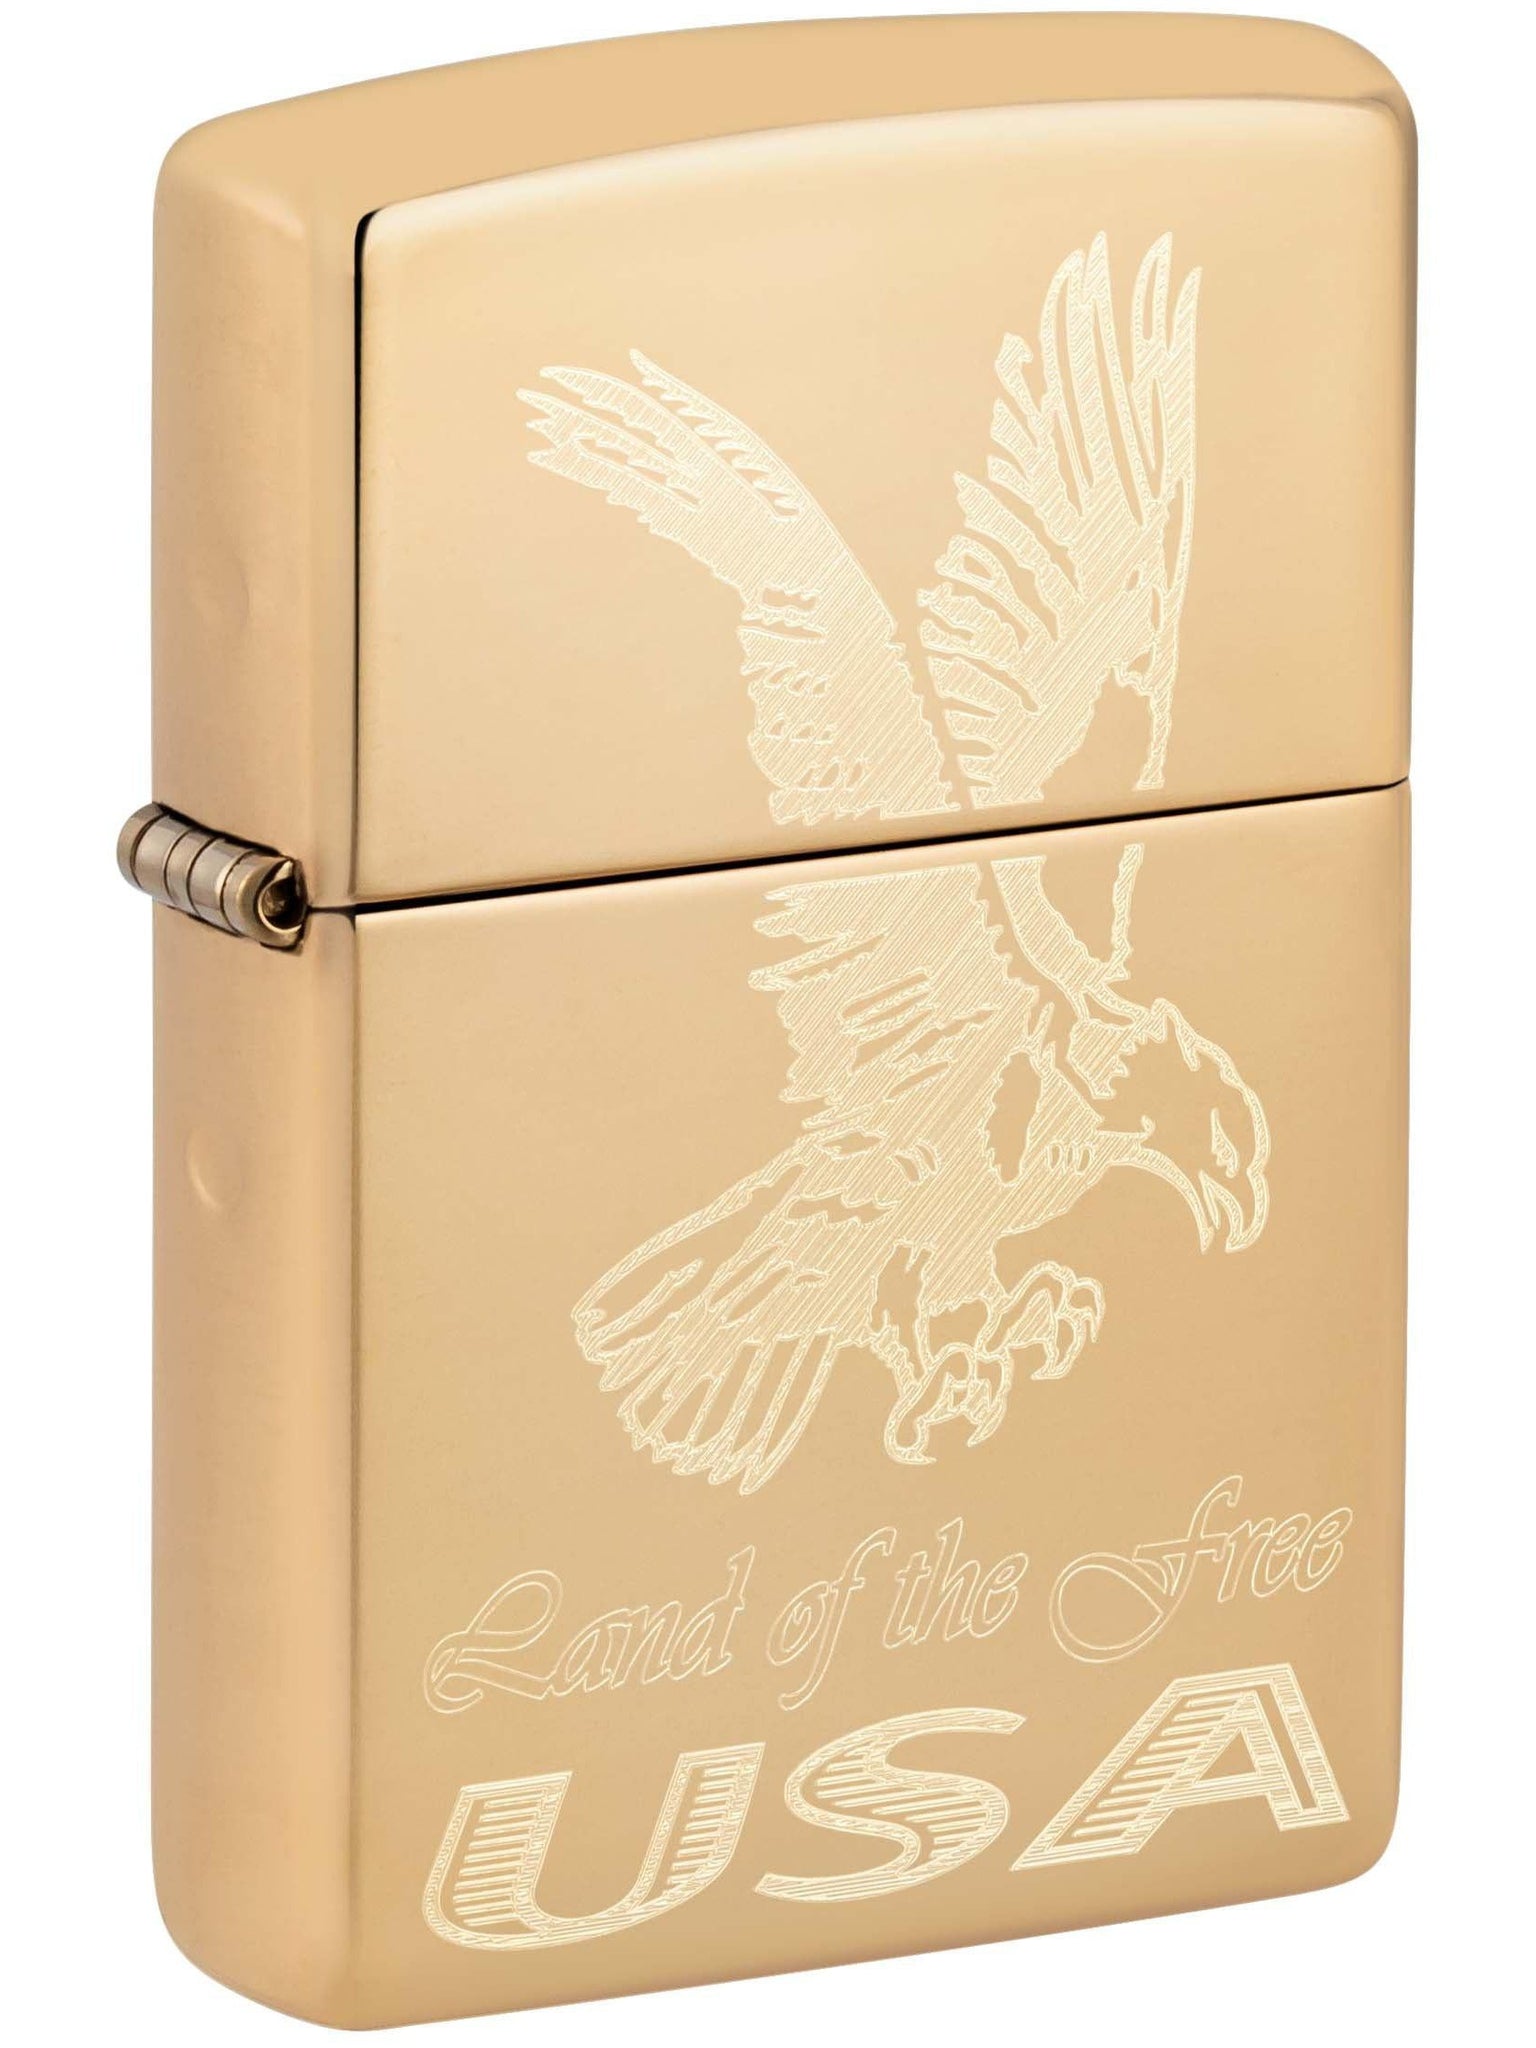 Zippo Lighter: American Eagle, Land of the Free USA, Engraved - High Polish Brass 81070